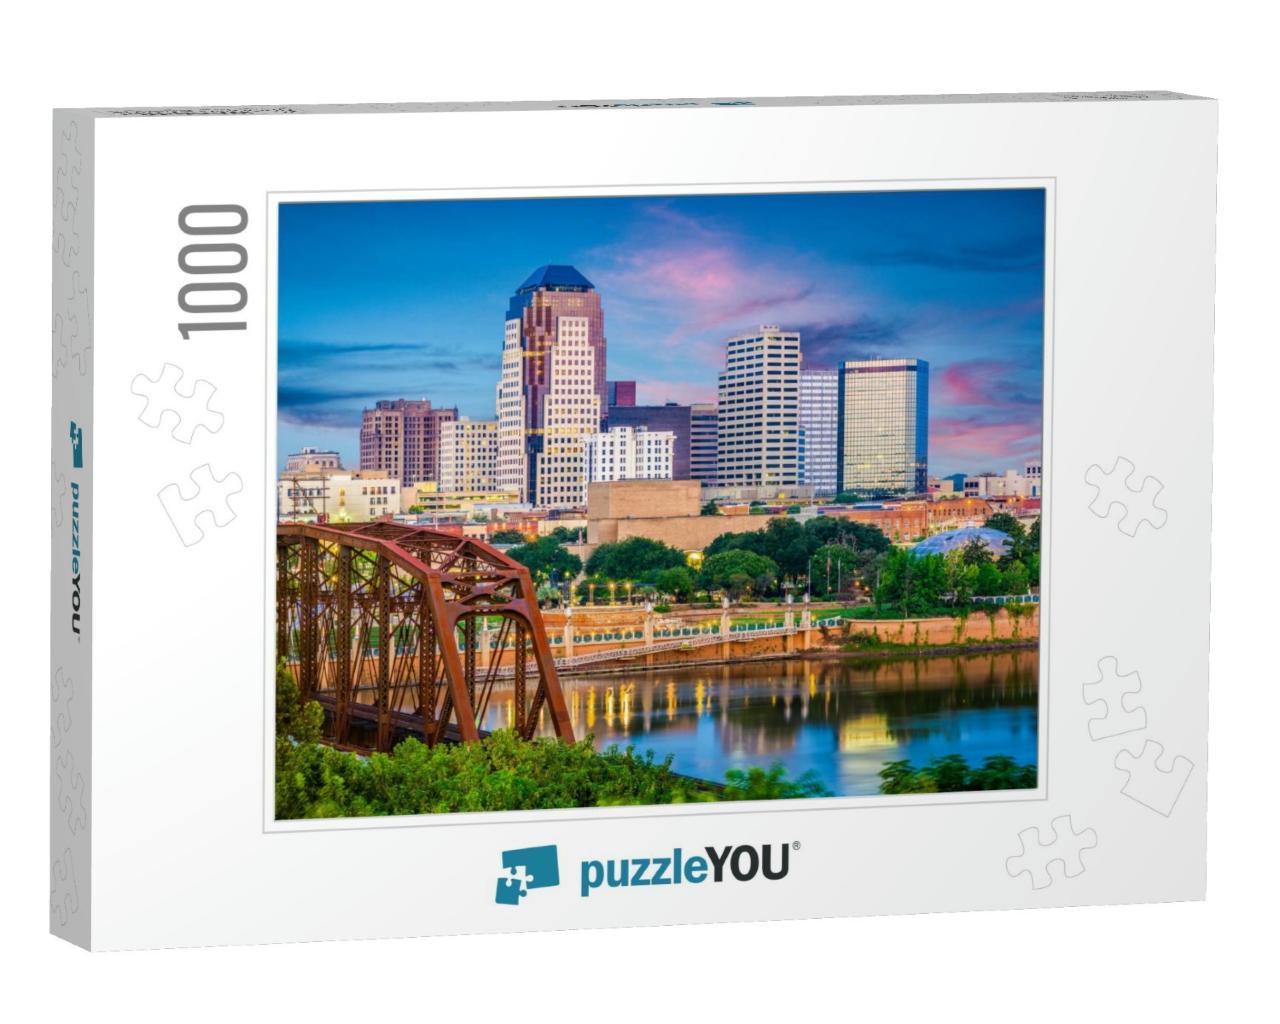 Shreveport, Louisiana, USA Skyline Over the Red River At D... Jigsaw Puzzle with 1000 pieces